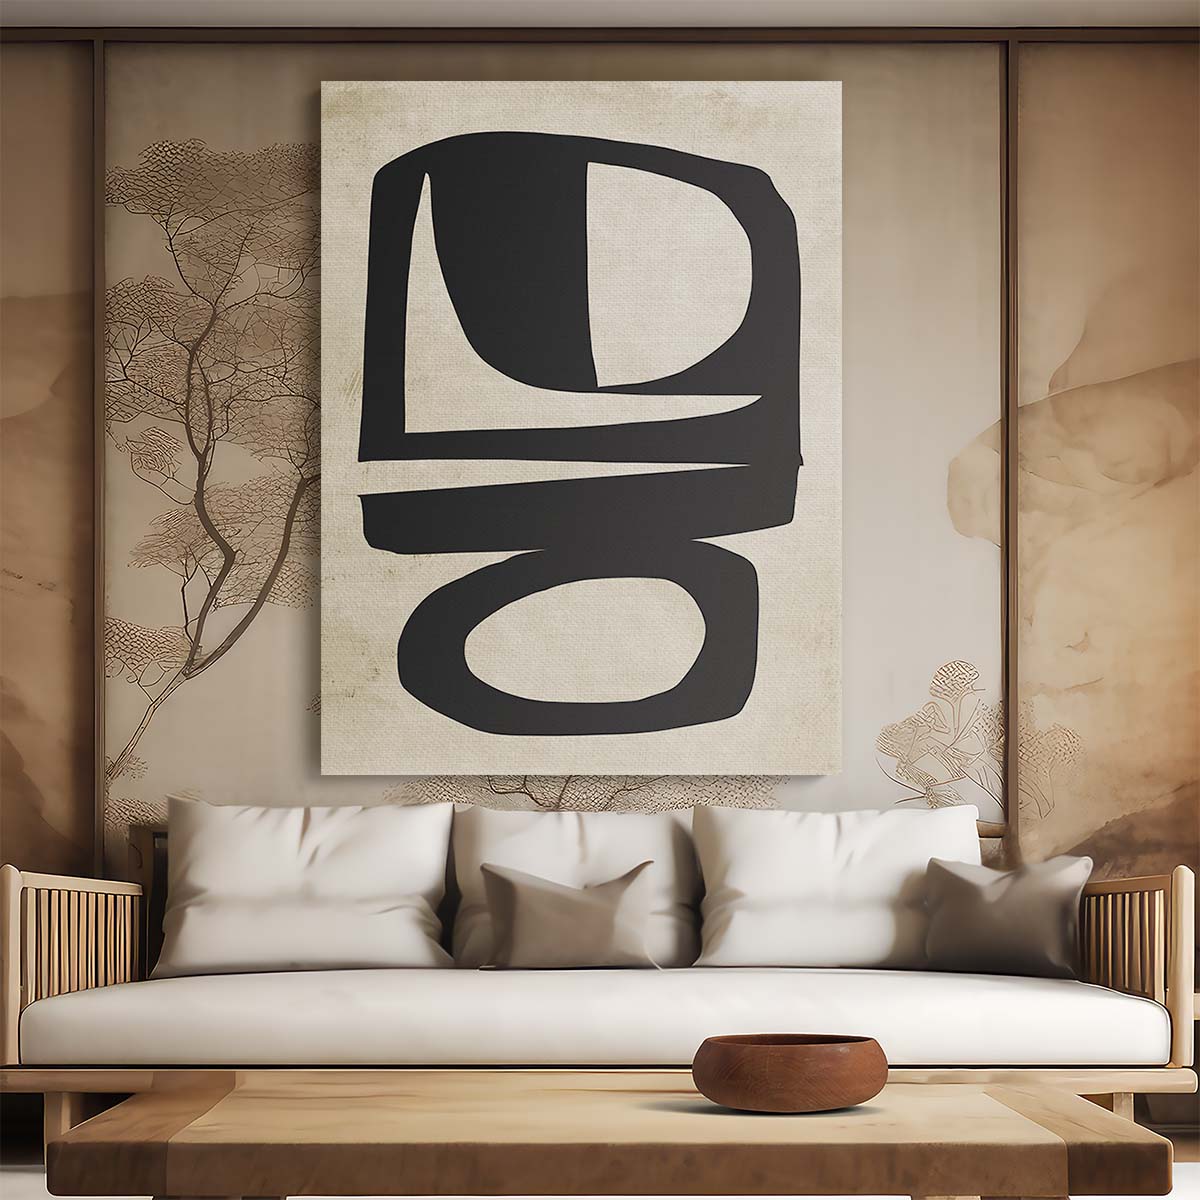 Modern Minimalistic Abstract Illustration by Dan Hobday by Luxuriance Designs, made in USA